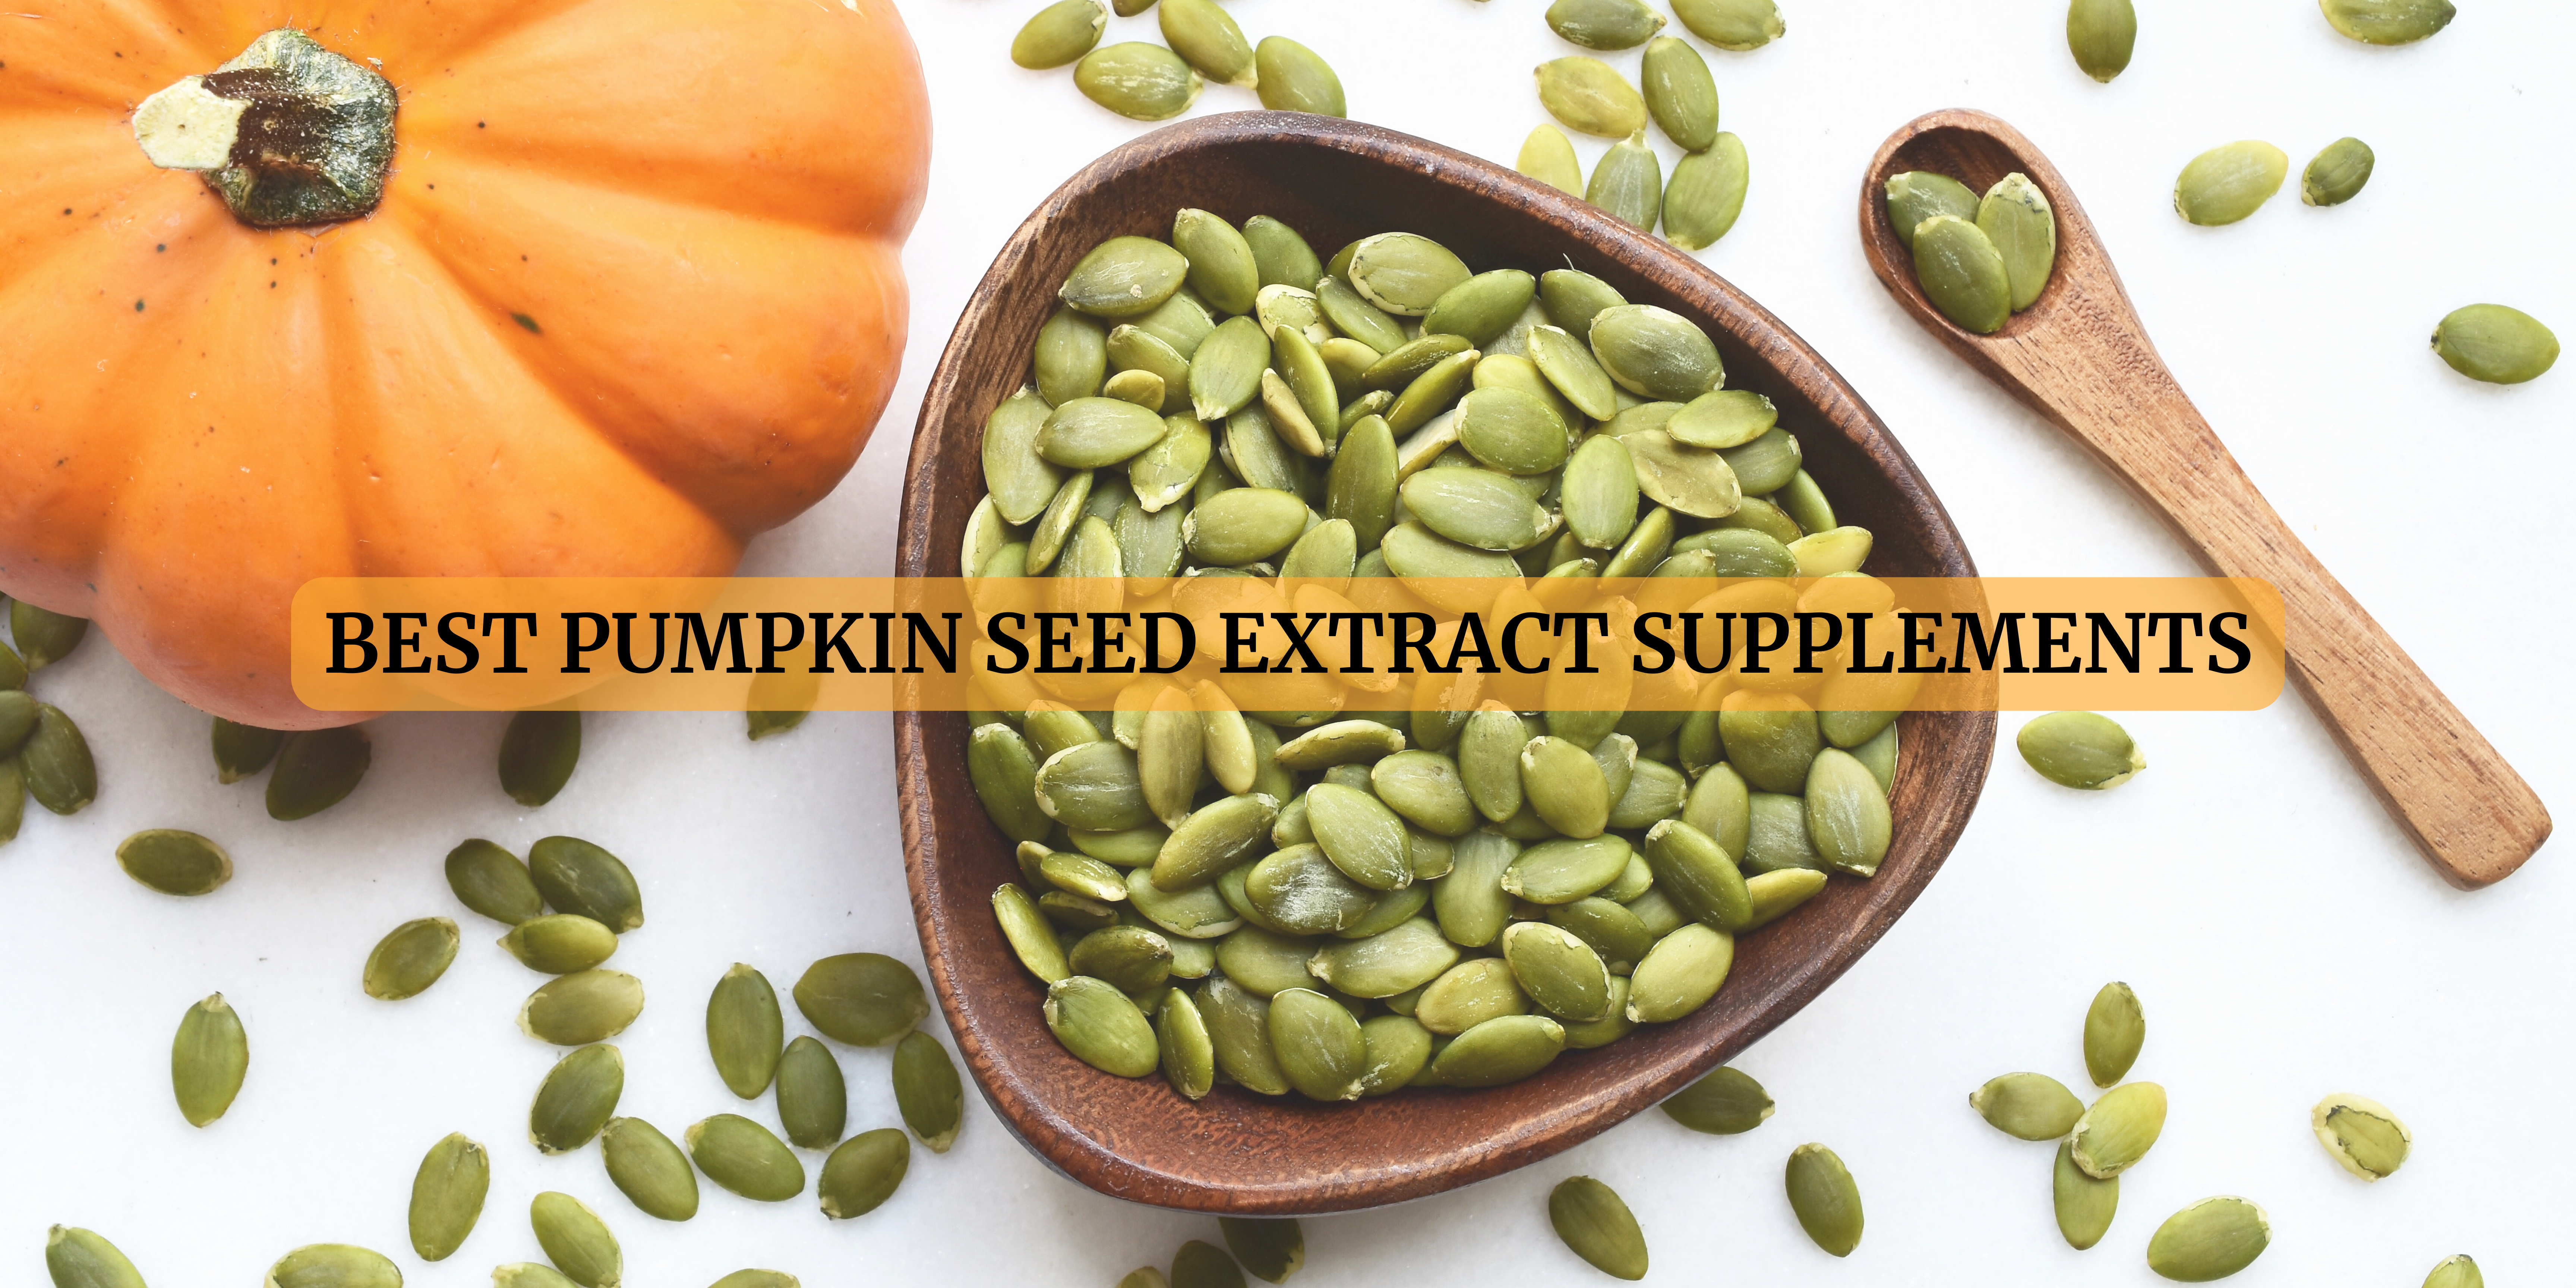 pumpkin seed extract supplements in Germany